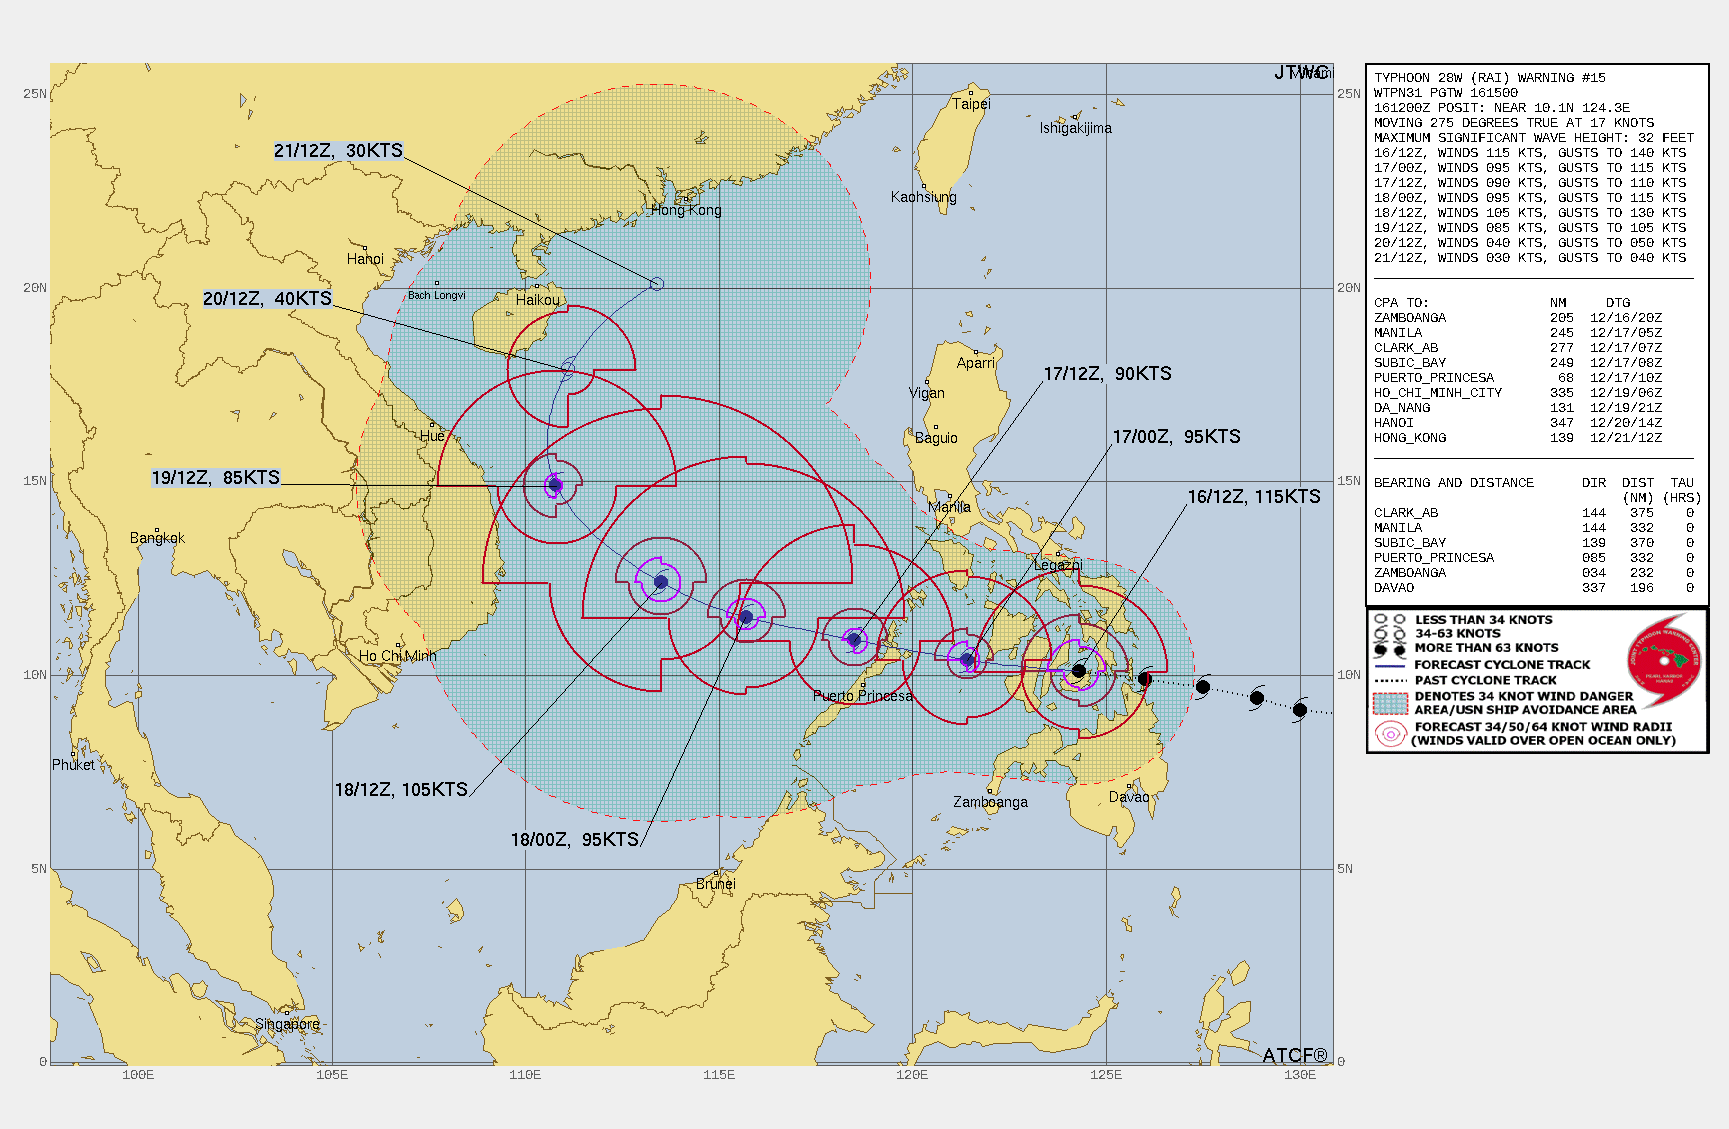 FORECAST REASONING.  SIGNIFICANT FORECAST CHANGES: THERE ARE NO SIGNIFICANT CHANGES TO THE FORECAST FROM THE PREVIOUS WARNING.  FORECAST DISCUSSION: TY 28W WILL CONTINUE TRACKING WEST-NORTHWEST OVER MULTIPLE PHILIPPINE ISLANDS AND THE ISLAND OF PALAWAN THROUGH THE NEXT 24 HOURS AND SLIGHTLY DECREASE INTENSITY AS IT INTERACTS WITH THE ISLANDS. HOWEVER, ONCE THE STORM MOVES WEST OF PALAWAN, IT WILL BEGIN TO TAP INTO A STRONGER POLEWARD OUTFLOW CHANNEL AND  REACH A PEAK INTENSITY OF 105 KNOTS/CAT 3 BY 48H JUST AS IT BEGINS TO TURN NORTH. BY 72H TY RAI WILL ENCOUNTER A NORTHEAST SURGE, ROUND THE RIDGE AXIS AND INDUCT COLD AIR INTO THE SYSTEM. THE COLD DRY AIR AND HIGHER VWS WILL RAPIDLY ERODE THE CORE OF THE SYSTEM THROUGH THE END OF THE FORECAST PERIOD.